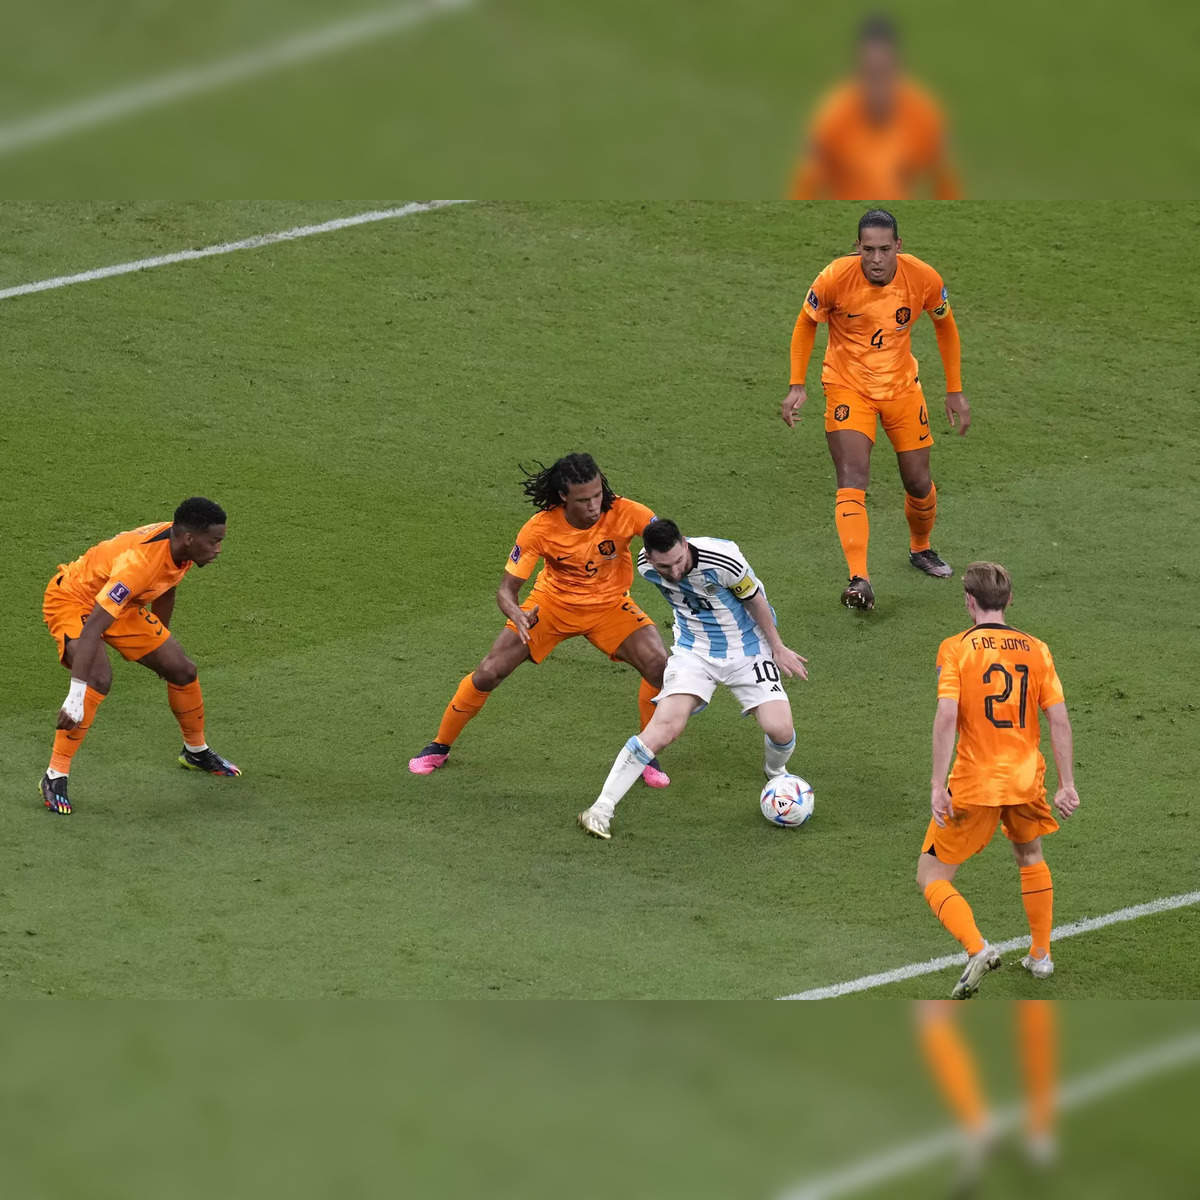 Argentina beat Netherlands on penalties to reach World Cup semi-finals